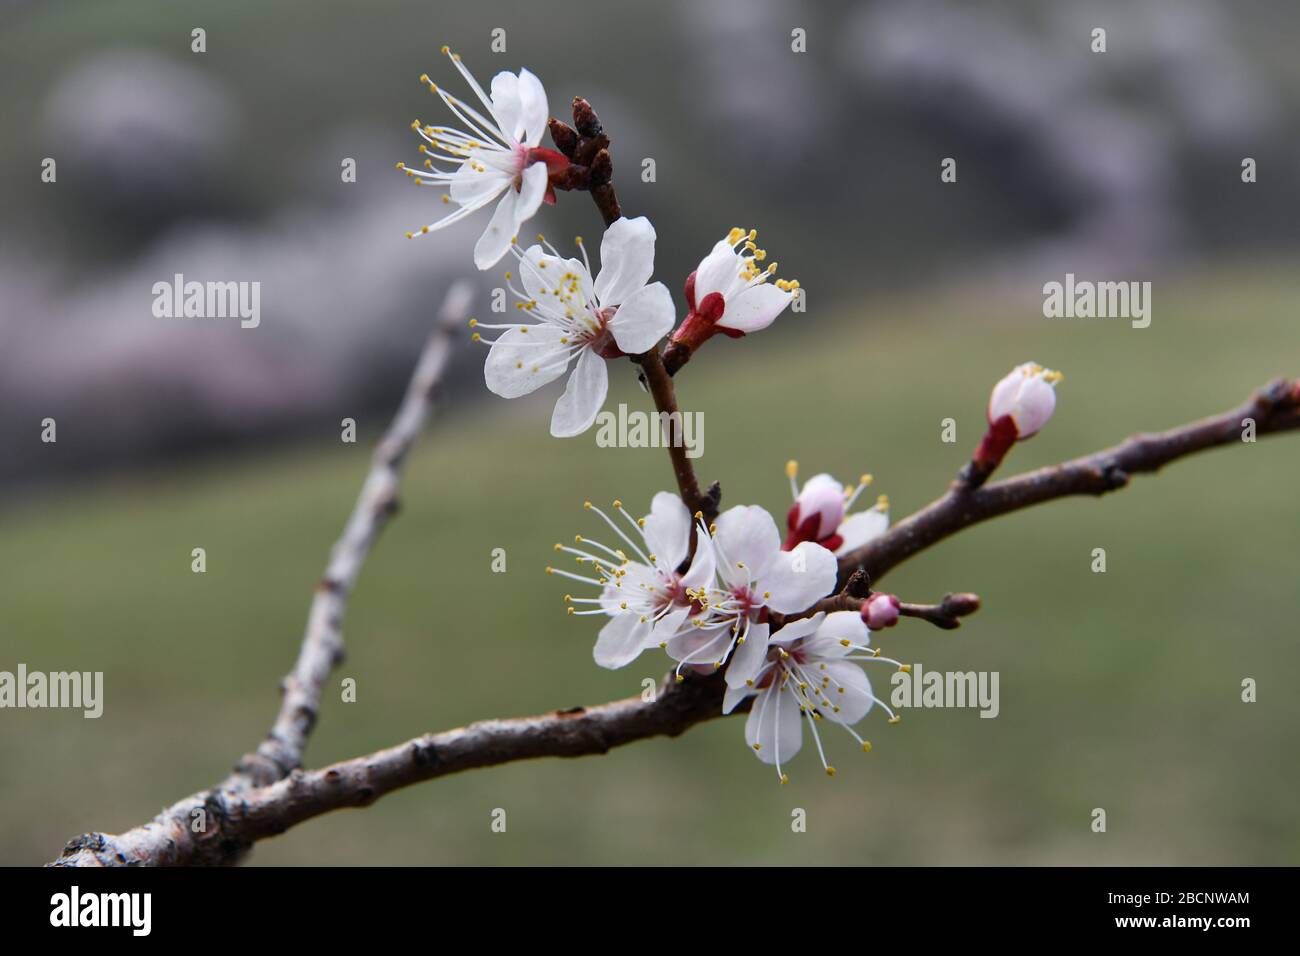 Ili. 4th Apr, 2020. Photo taken on April 4, 2020 shows apricot blossoms at a valley in Xinyuan County of Ili Kazakh Autonomous Prefecture, northwest China's Xinjiang Uygur Autonomous Region. Credit: Hang Rui/Xinhua/Alamy Live News Stock Photo